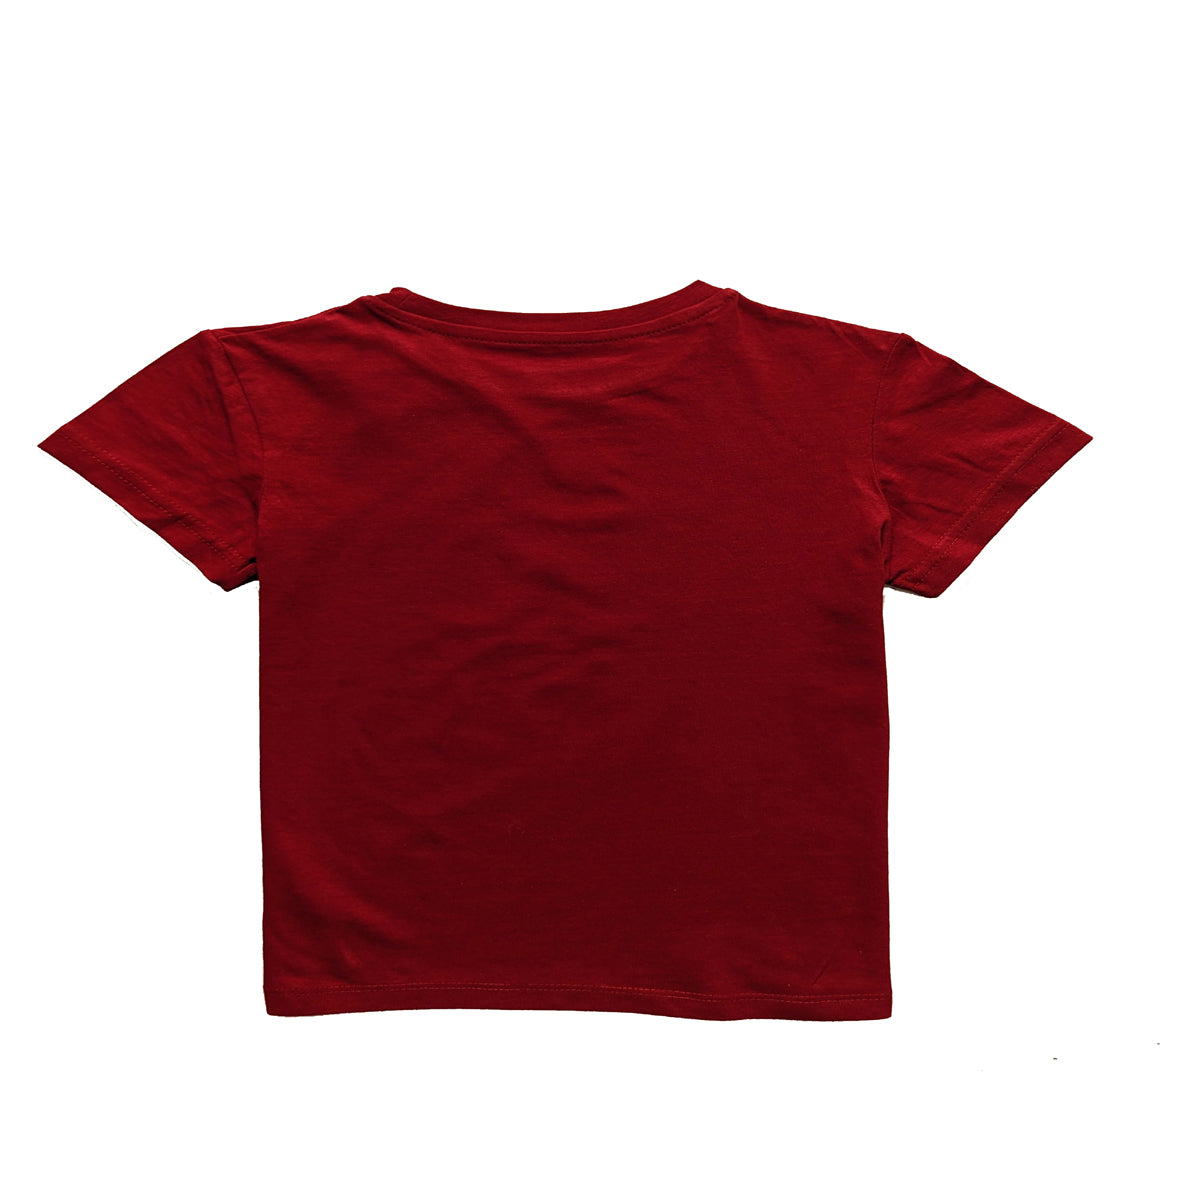 Adventure-Ready Red T-Shirt for Boys with Explore Graphic